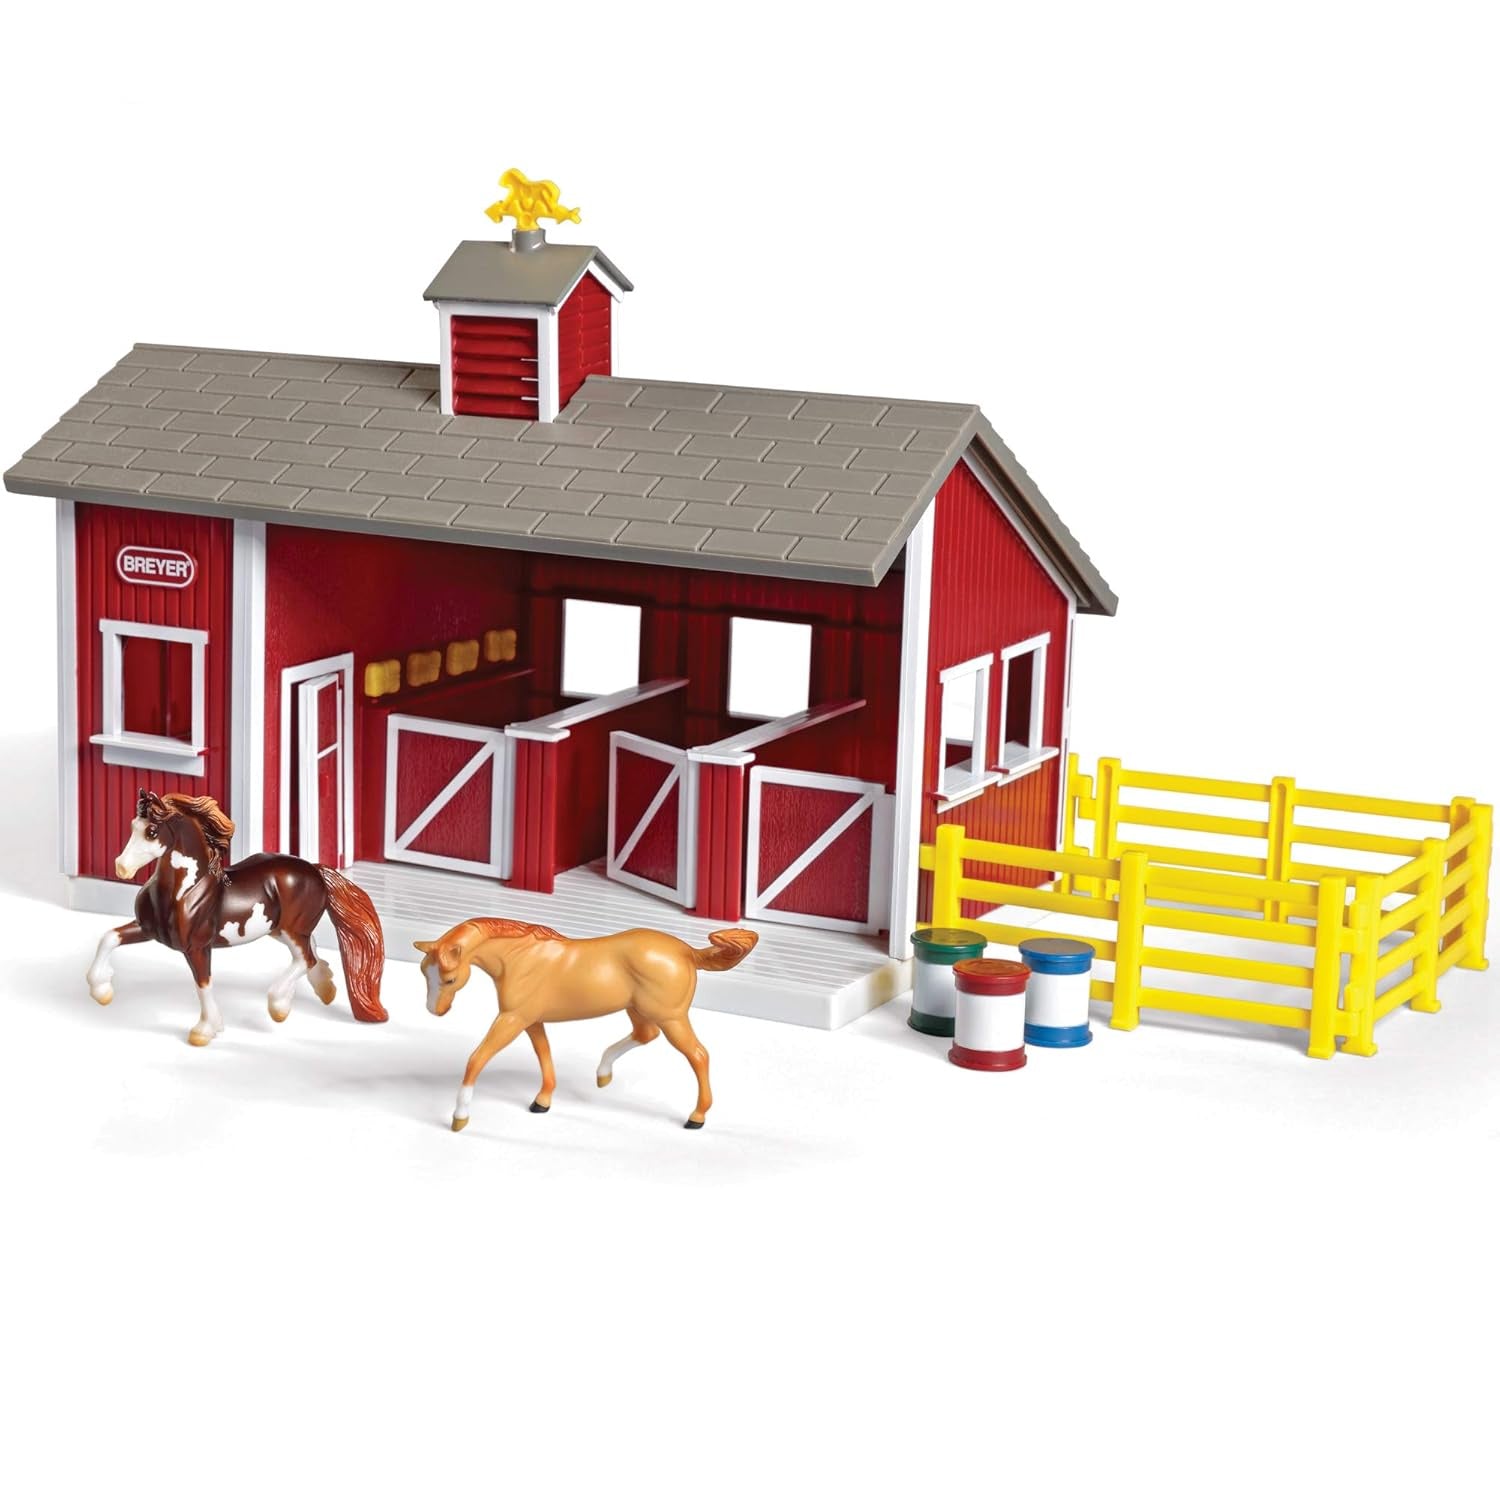 Breyer Red Stable Playset With 2 Stablemates Horses